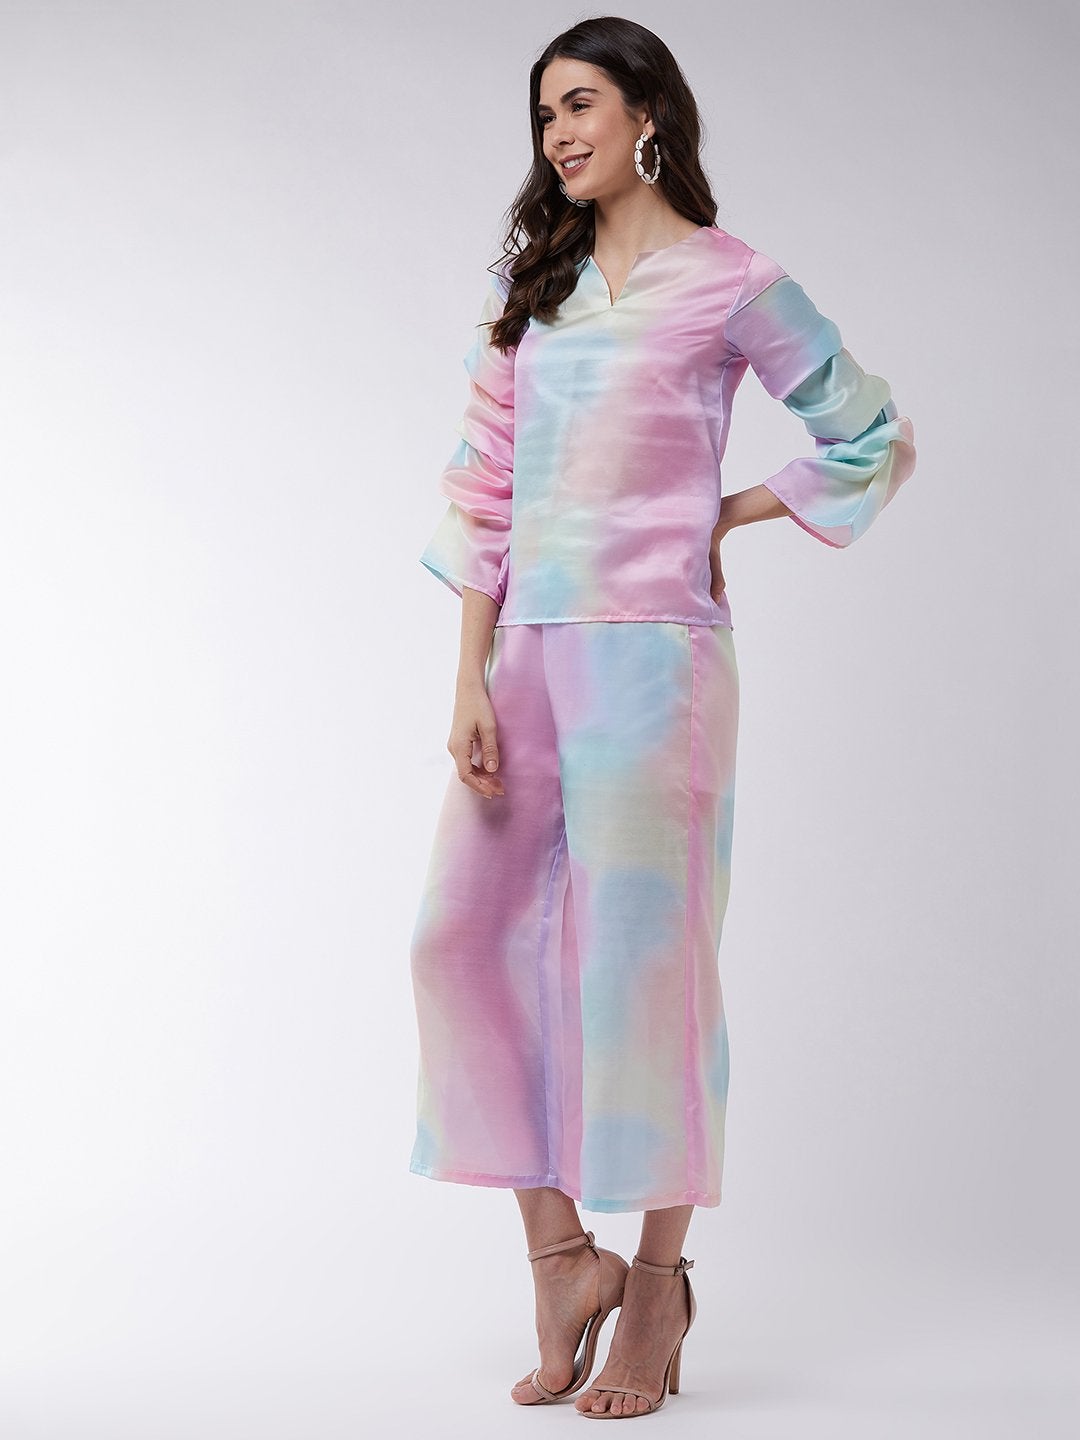 Women's Candy Inspired Digital Printed Top With Pleated Sleeves And Matched Pants - Pannkh